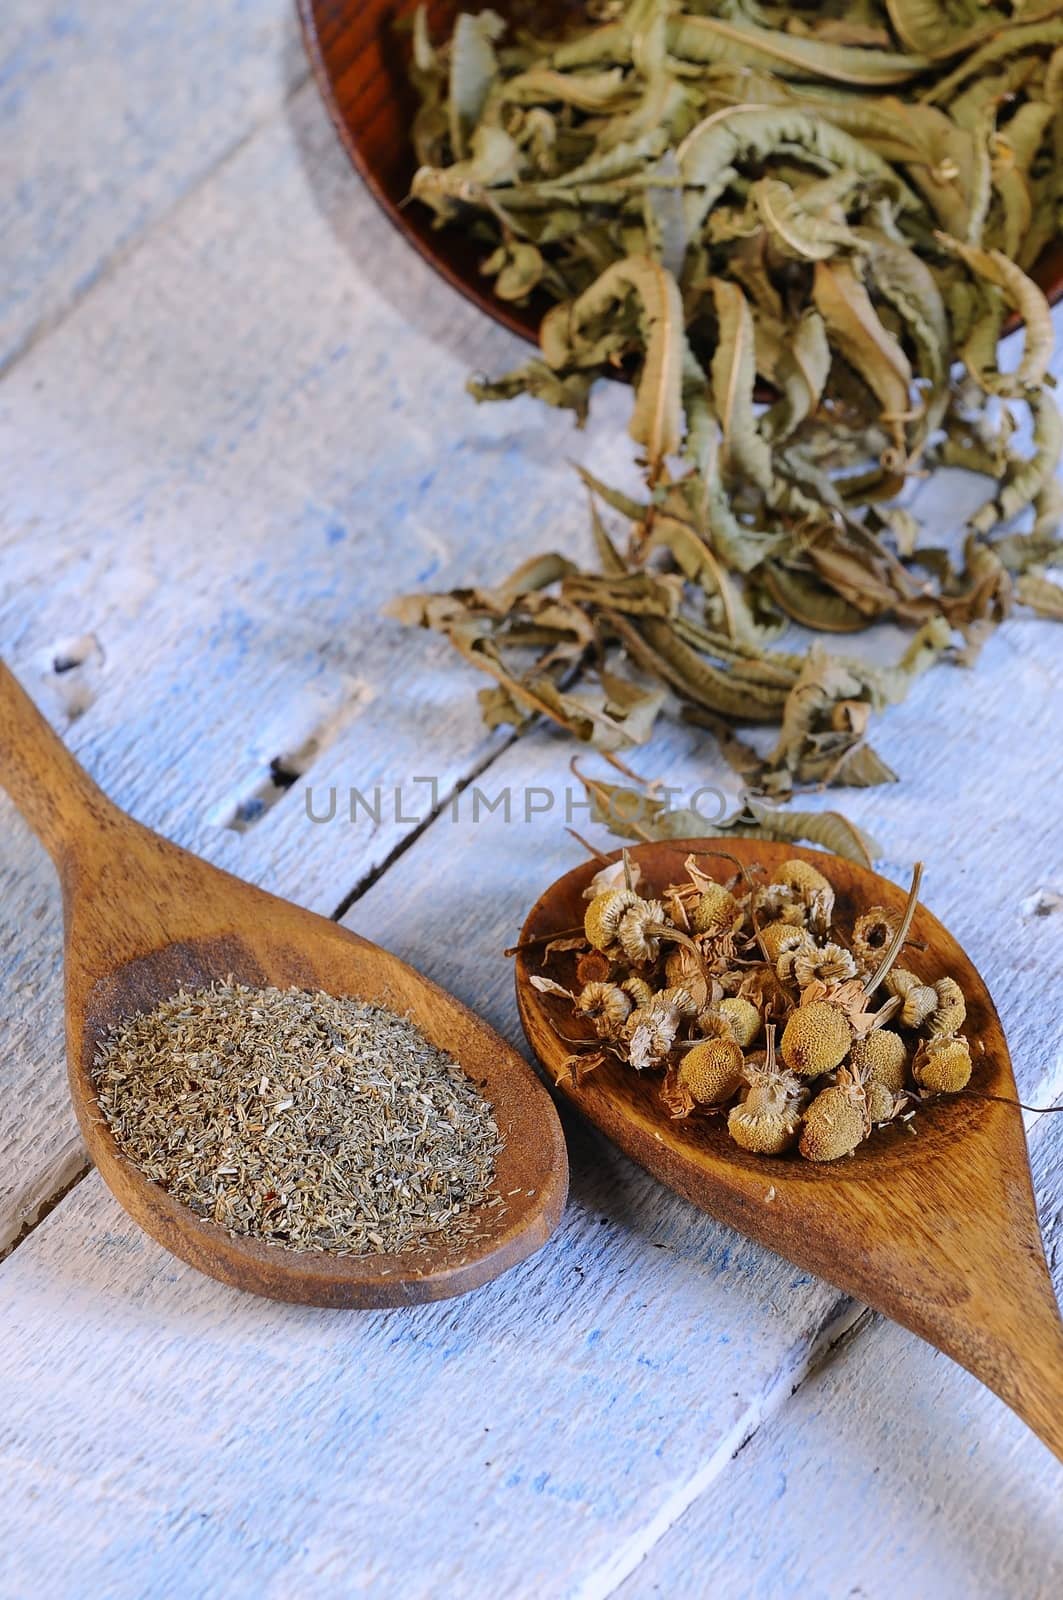 Chamomile and herbs on wooden table in the kitchen.